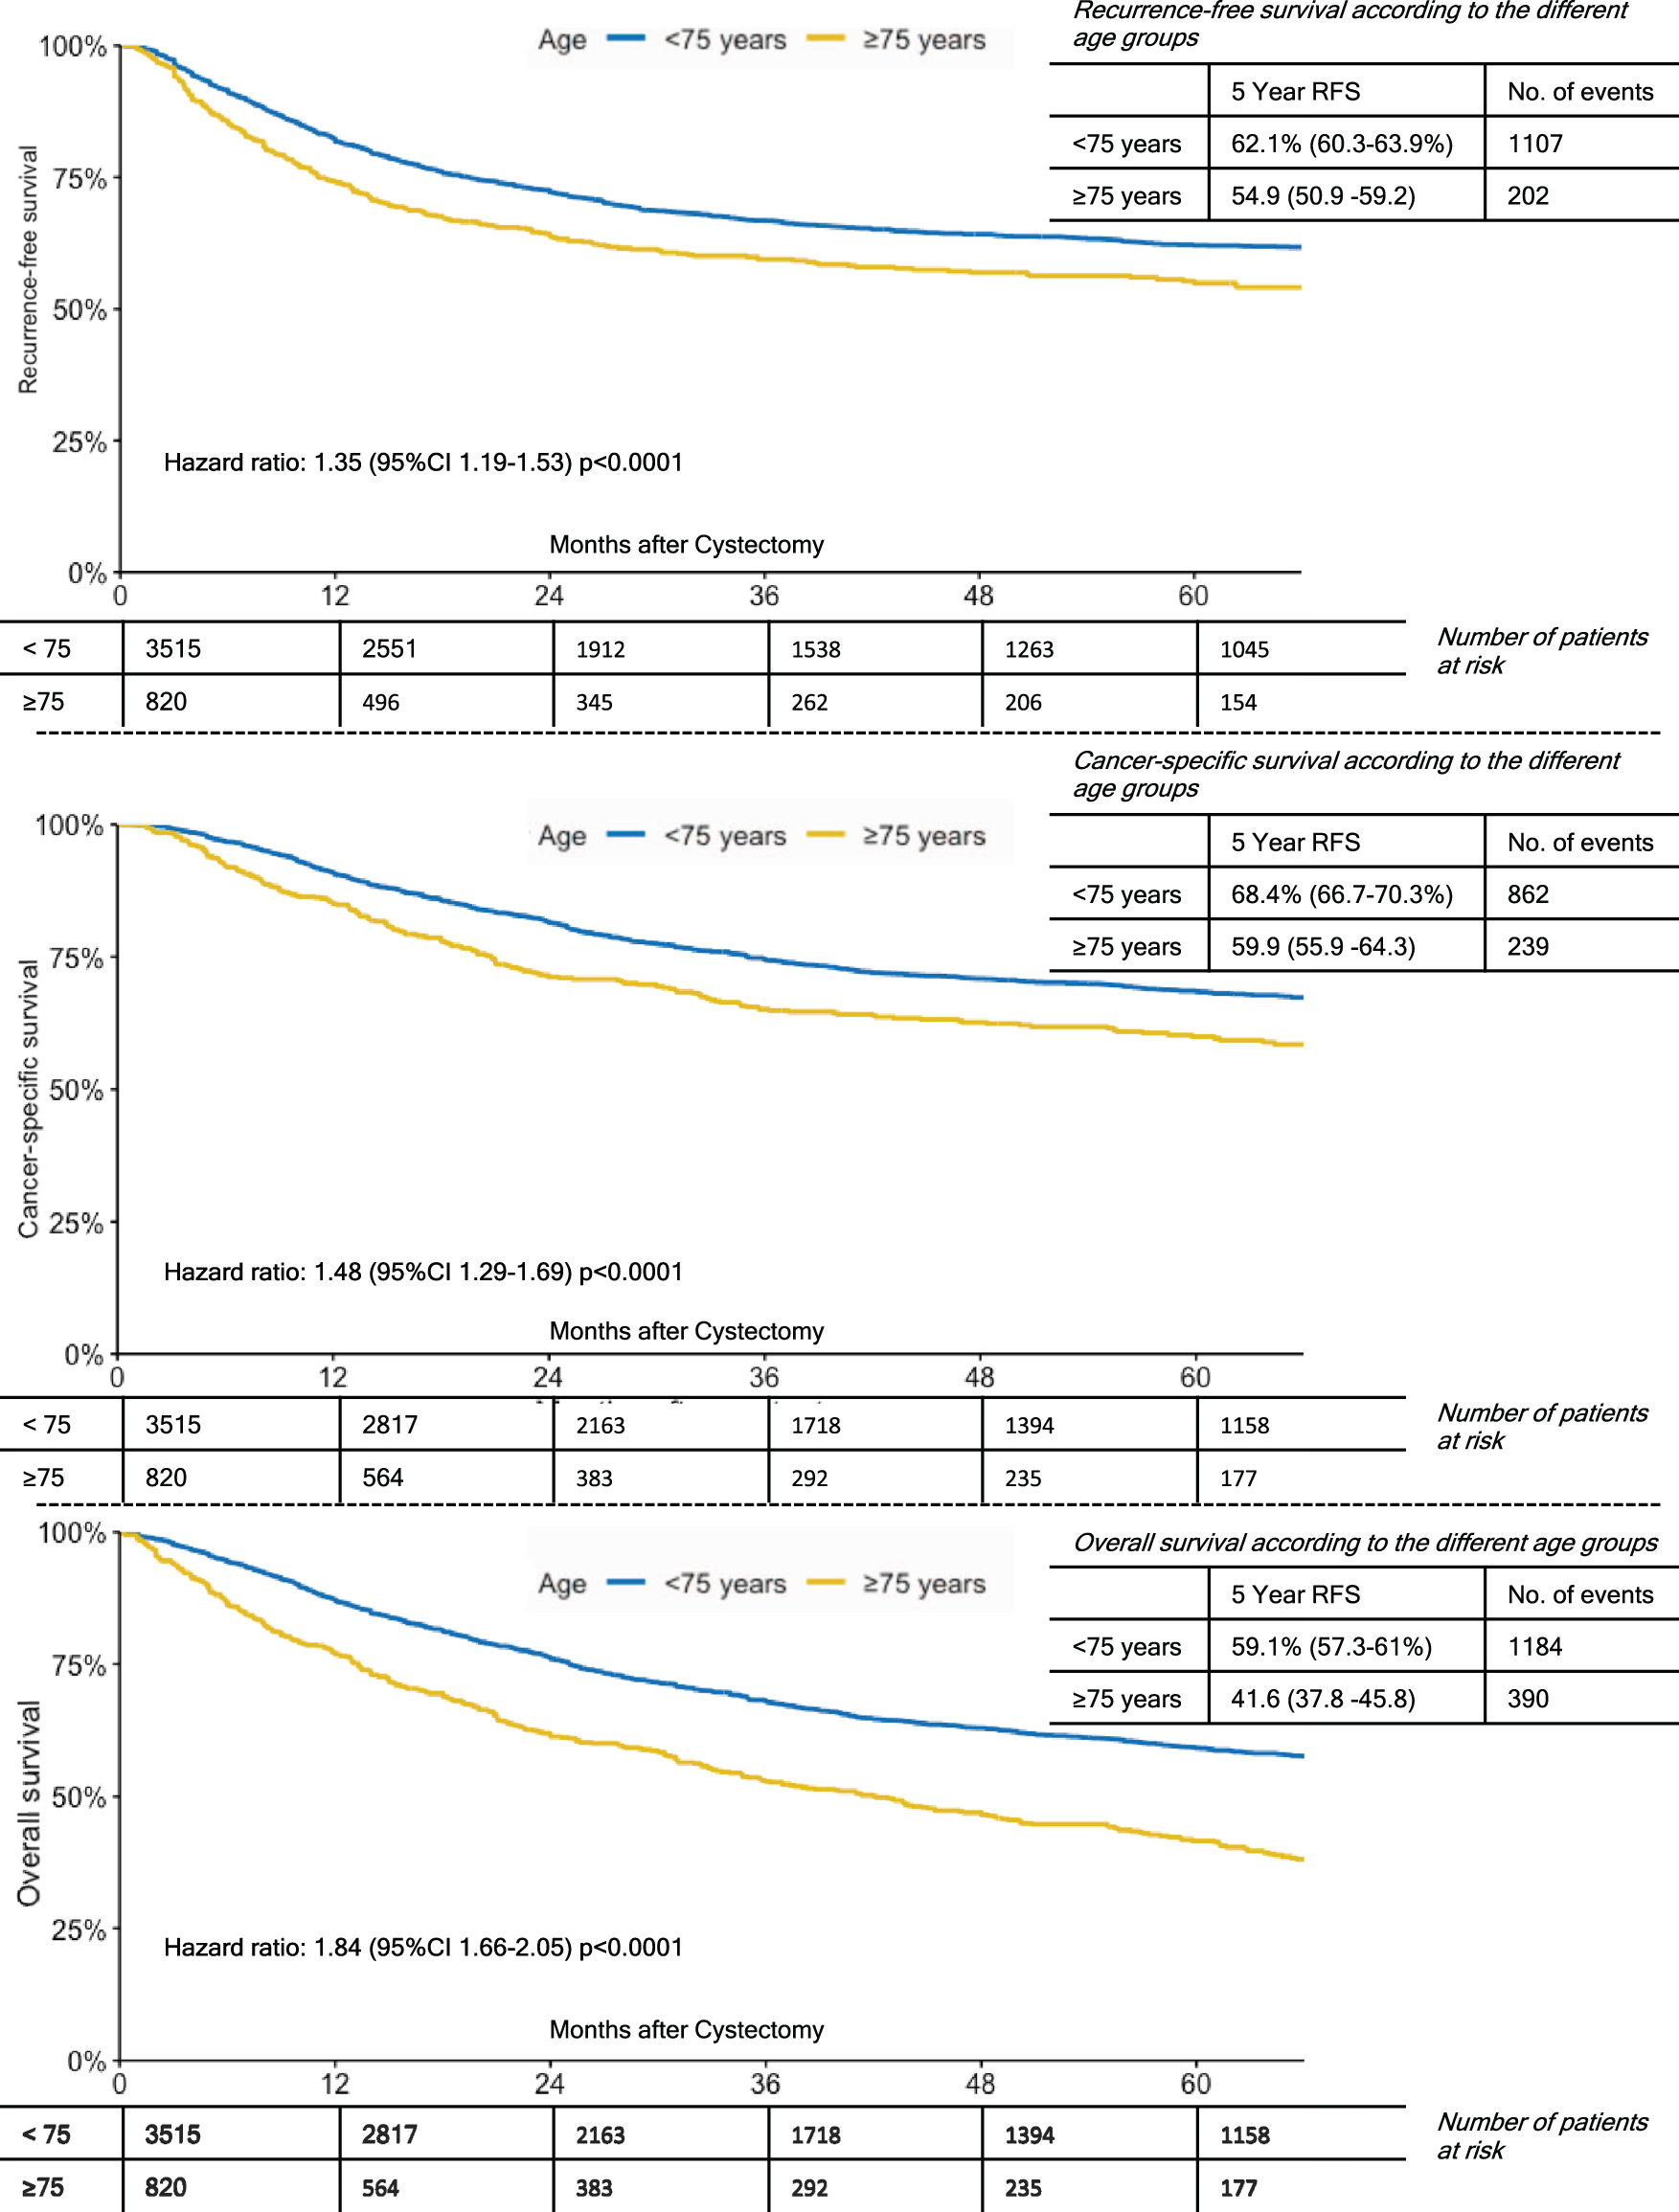 Kaplan-Meier Curves for 5-Year Recurrence-Free Survival; Cancer-Specific Survival and Overall Survival by Age Groups (< 75 vs. ≥75 years old).